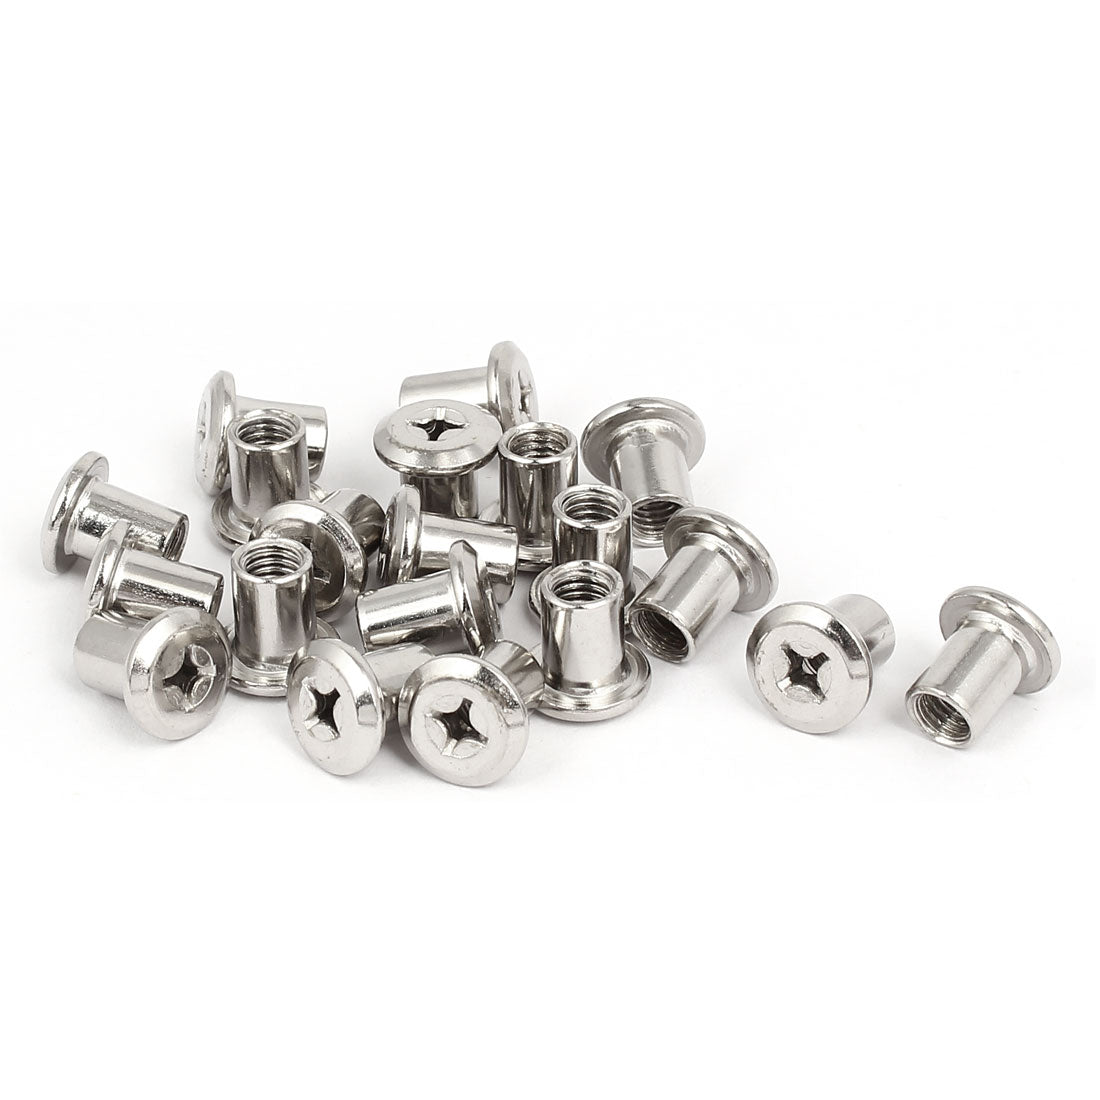 uxcell Uxcell M6x10mm Metal Phillips Head Nuts Furniture Hardware Fittings 20pcs